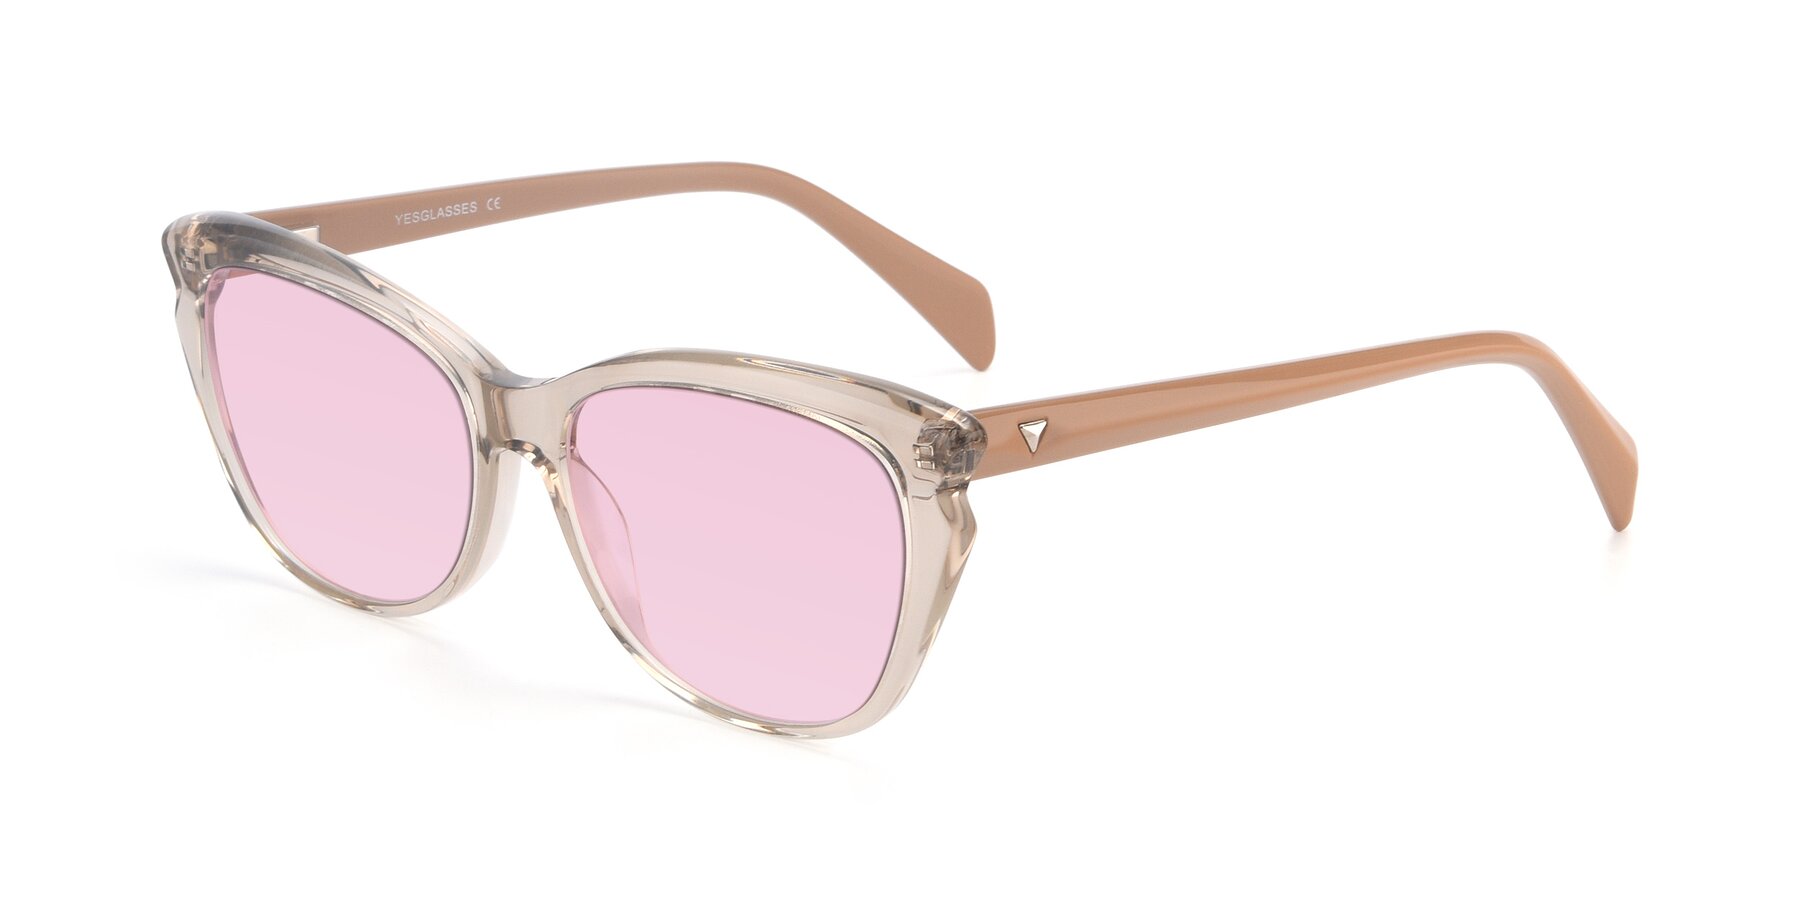 Angle of 17629 in Transparent Brown with Light Pink Tinted Lenses